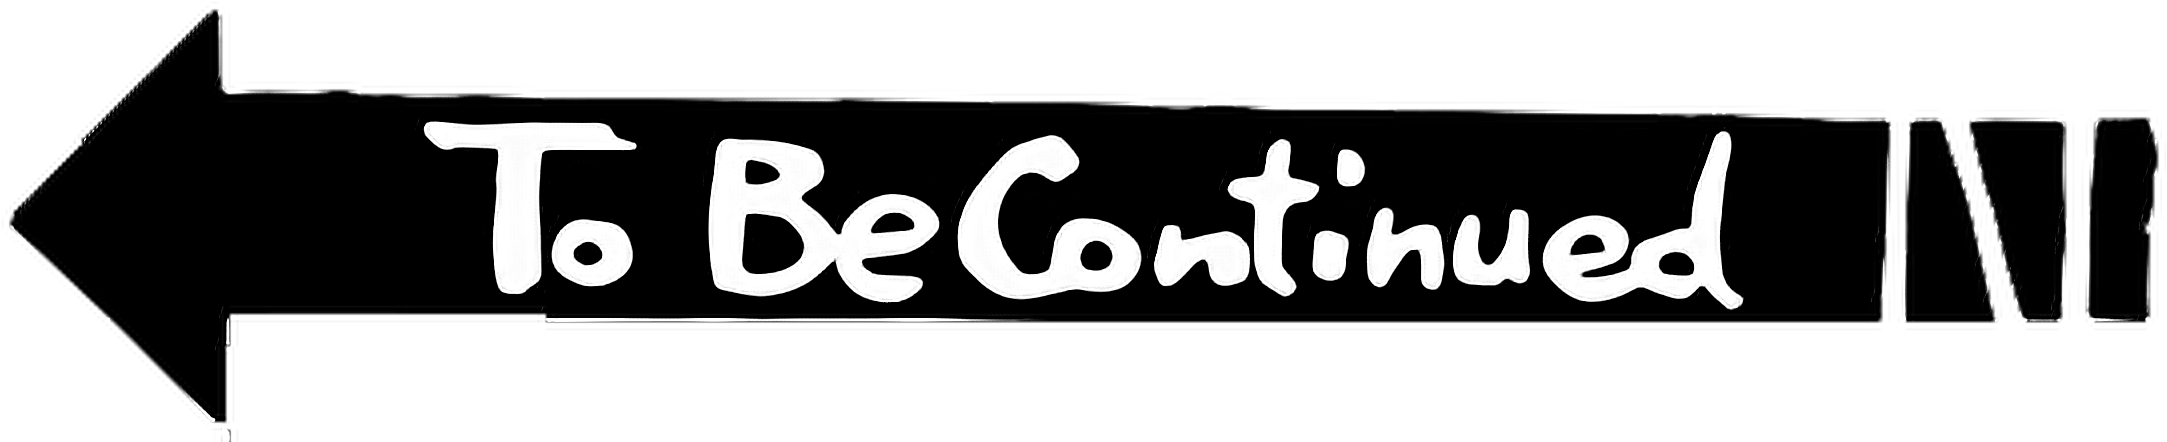 To Be Continued PNG Image 